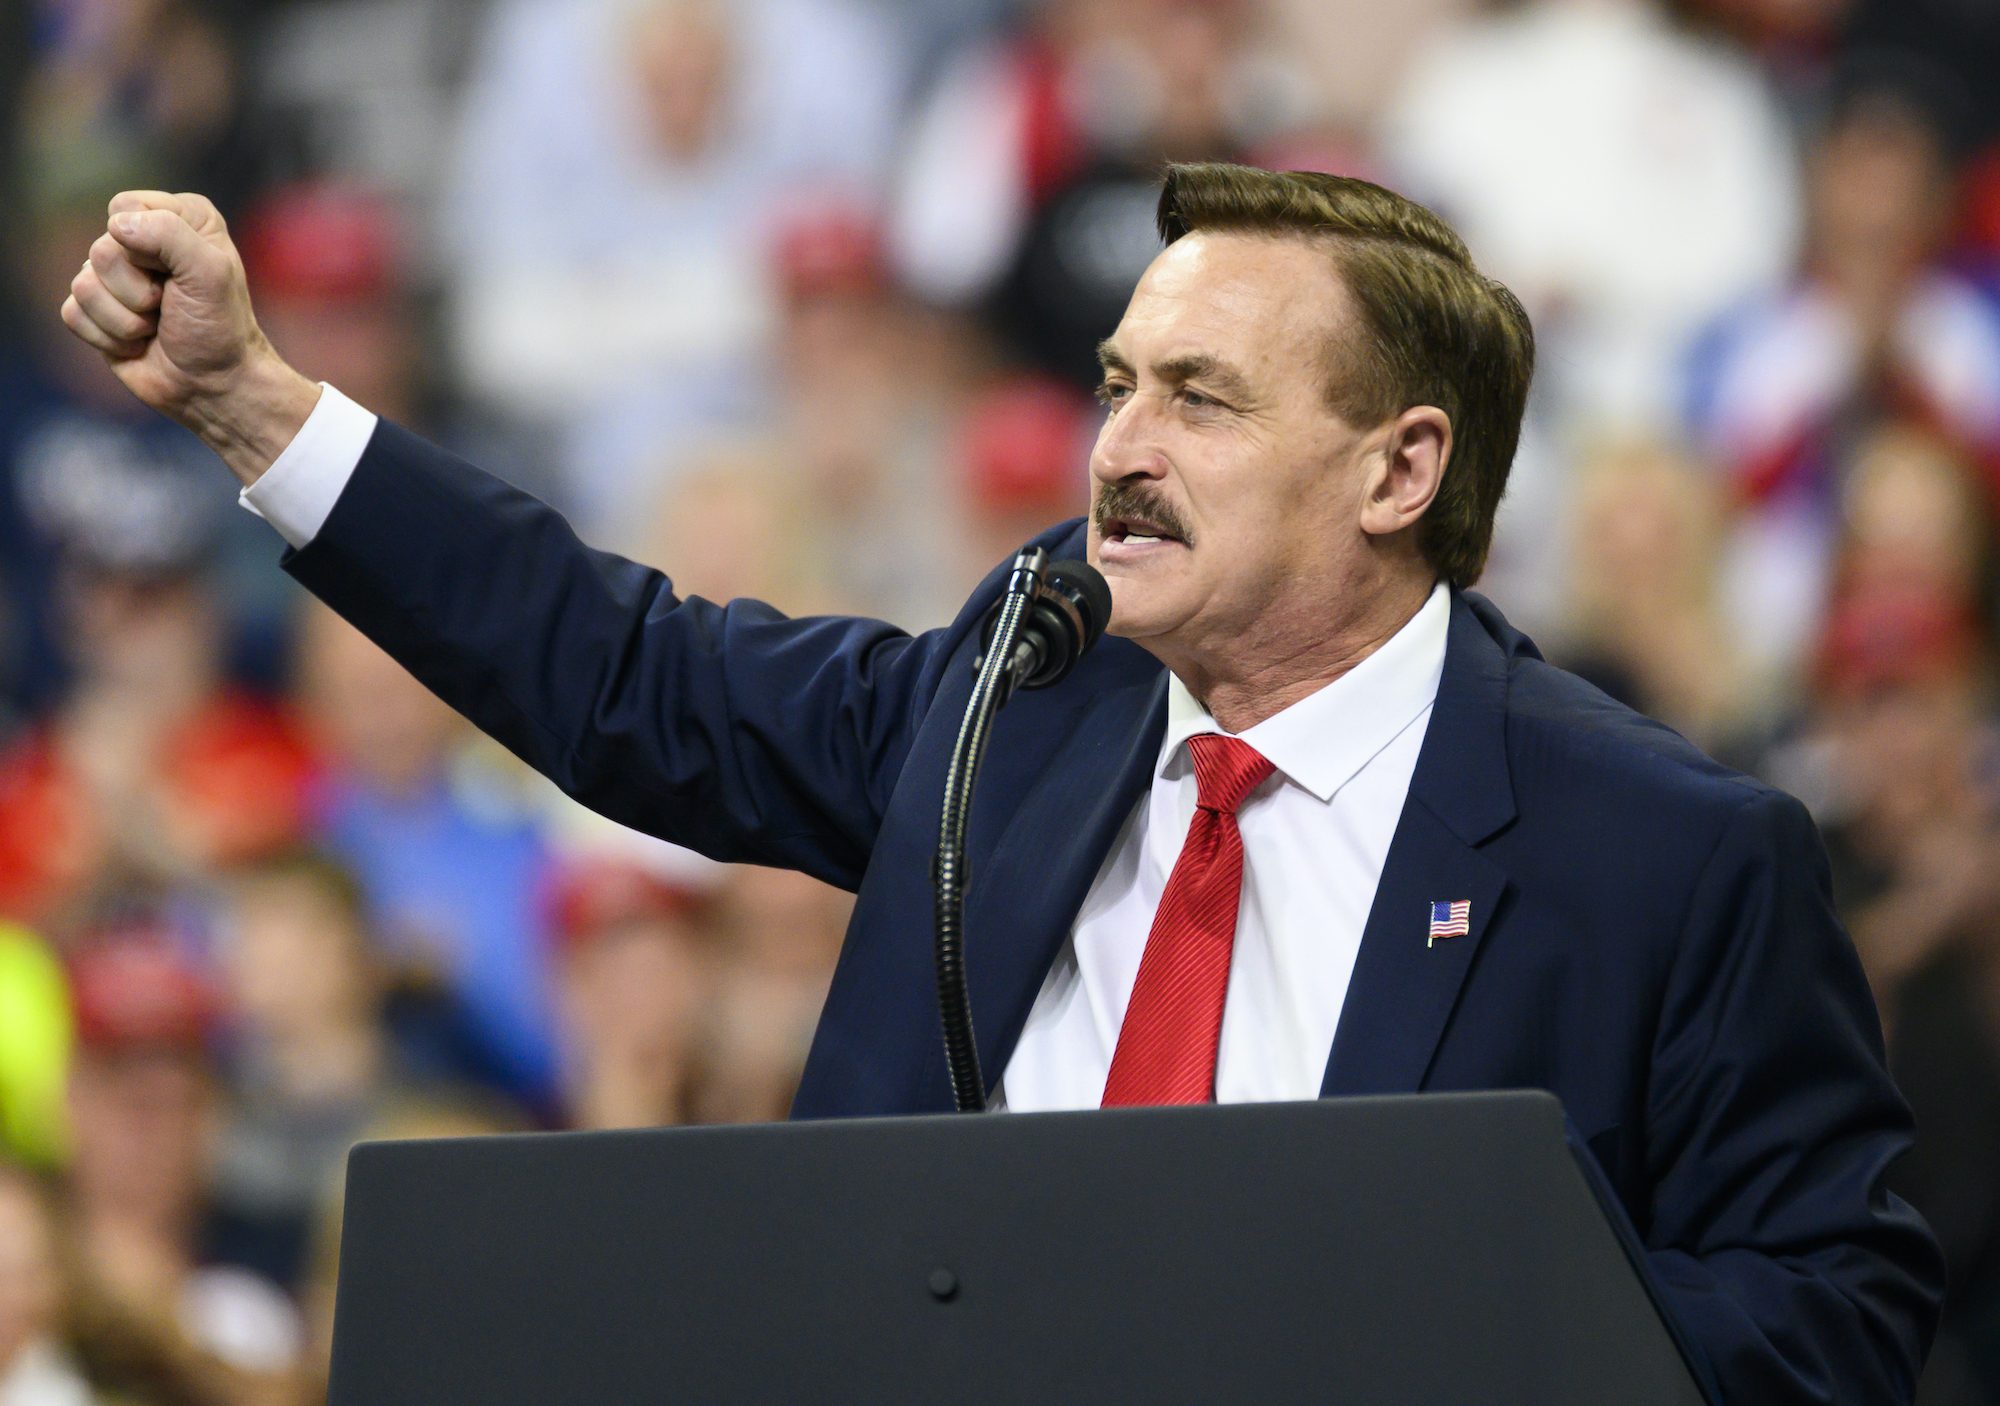 MyPillow CEO Mike Lindell Rejoins Twitter, Suspended Again Hours Later